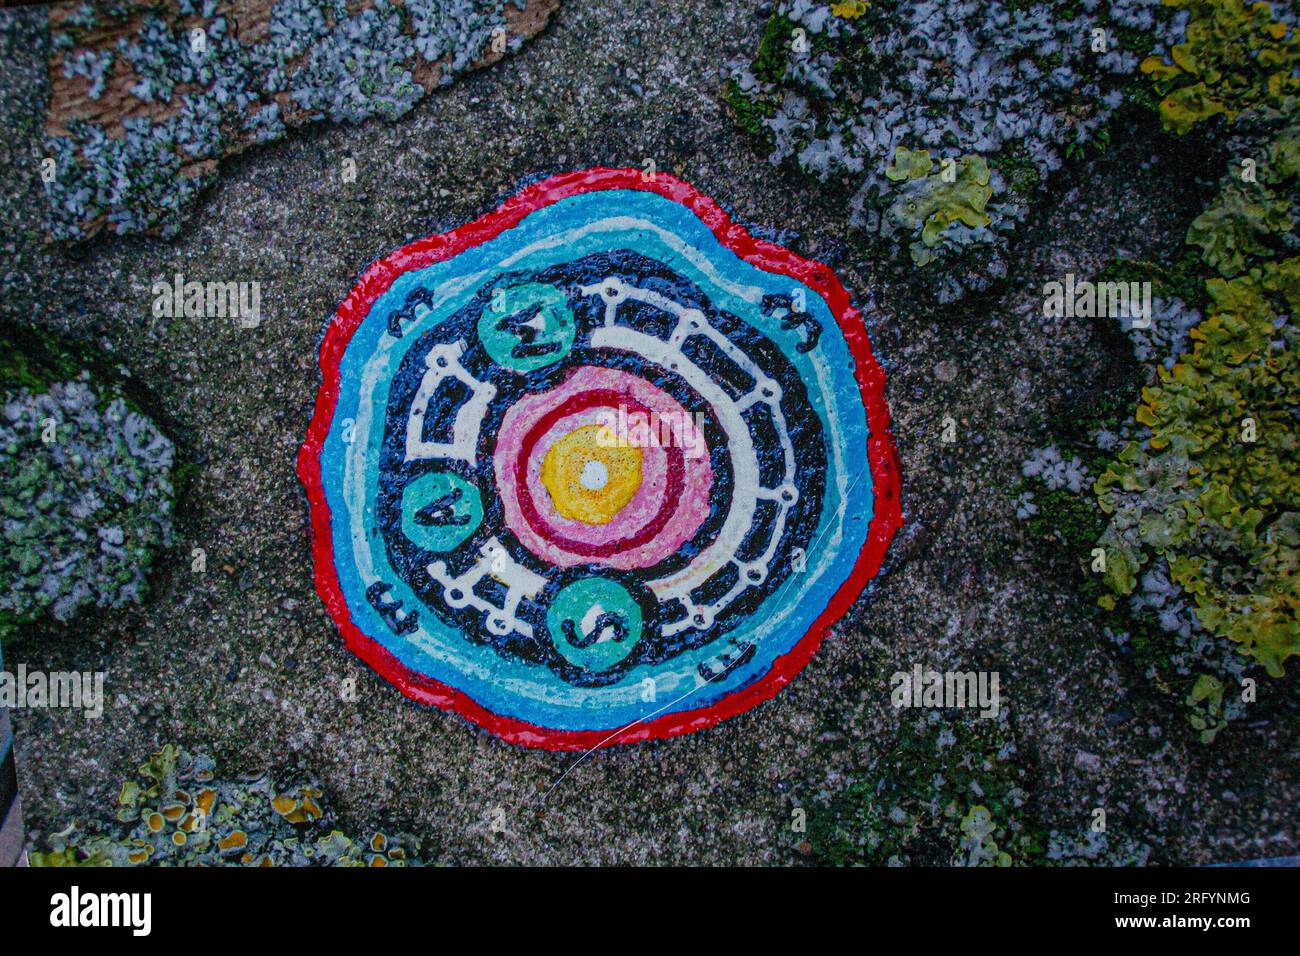 London, UK. Tiny work of art painted on a discarded piece of chewing gum by Ben Wilson 'Chewing Gum Man' on the pavement Stock Photo